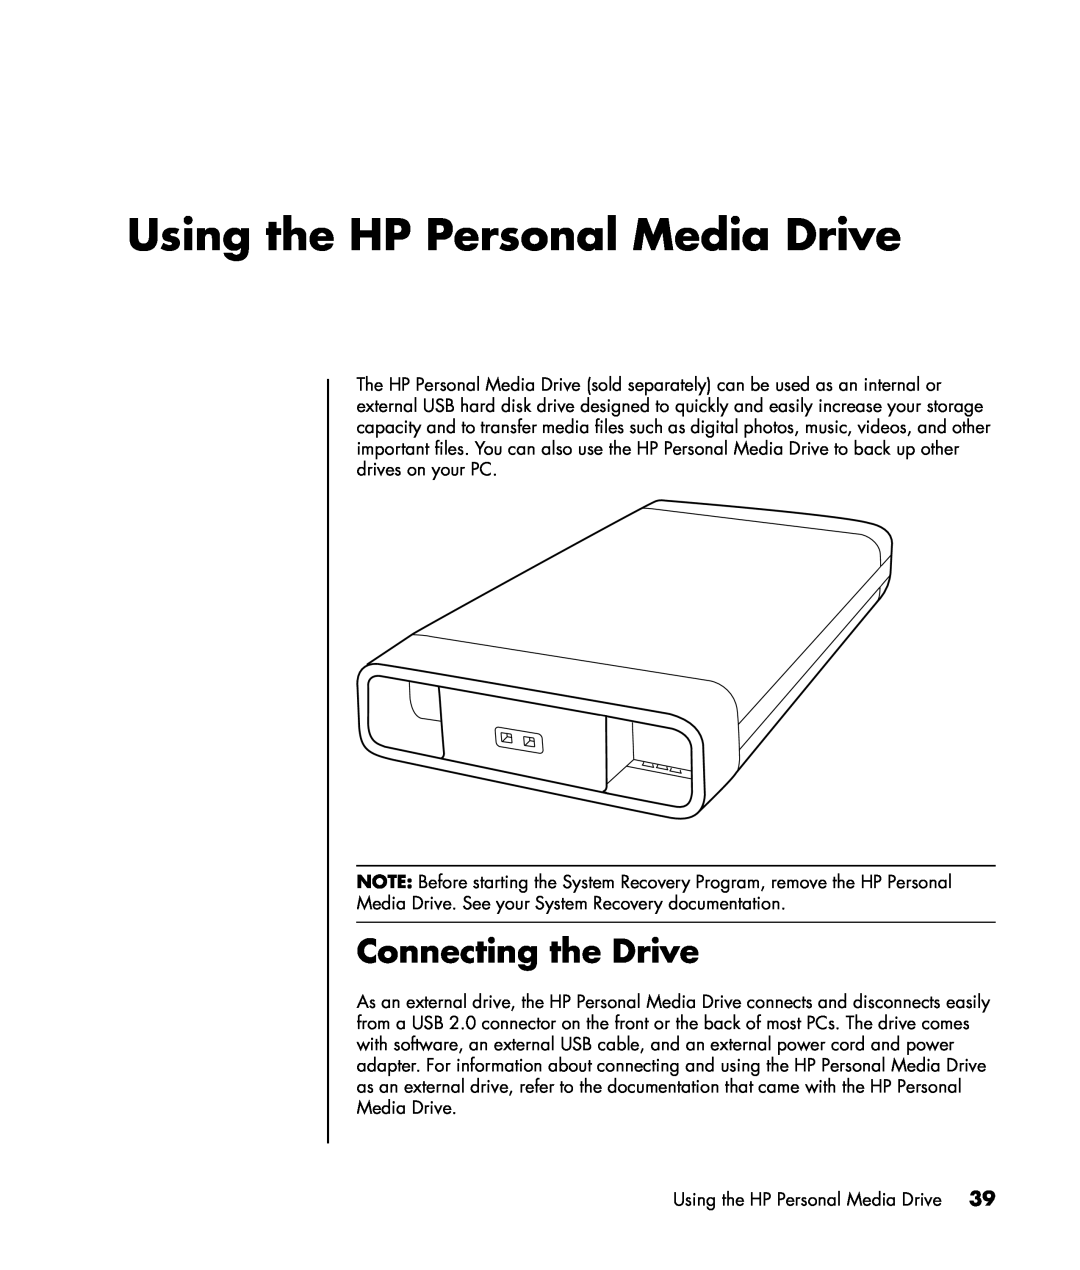 HP a1100n, a1163w, a1173w, a1140n, a1133w, a1102n, a1104x, a1106n, a1130n Using the HP Personal Media Drive, Connecting the Drive 